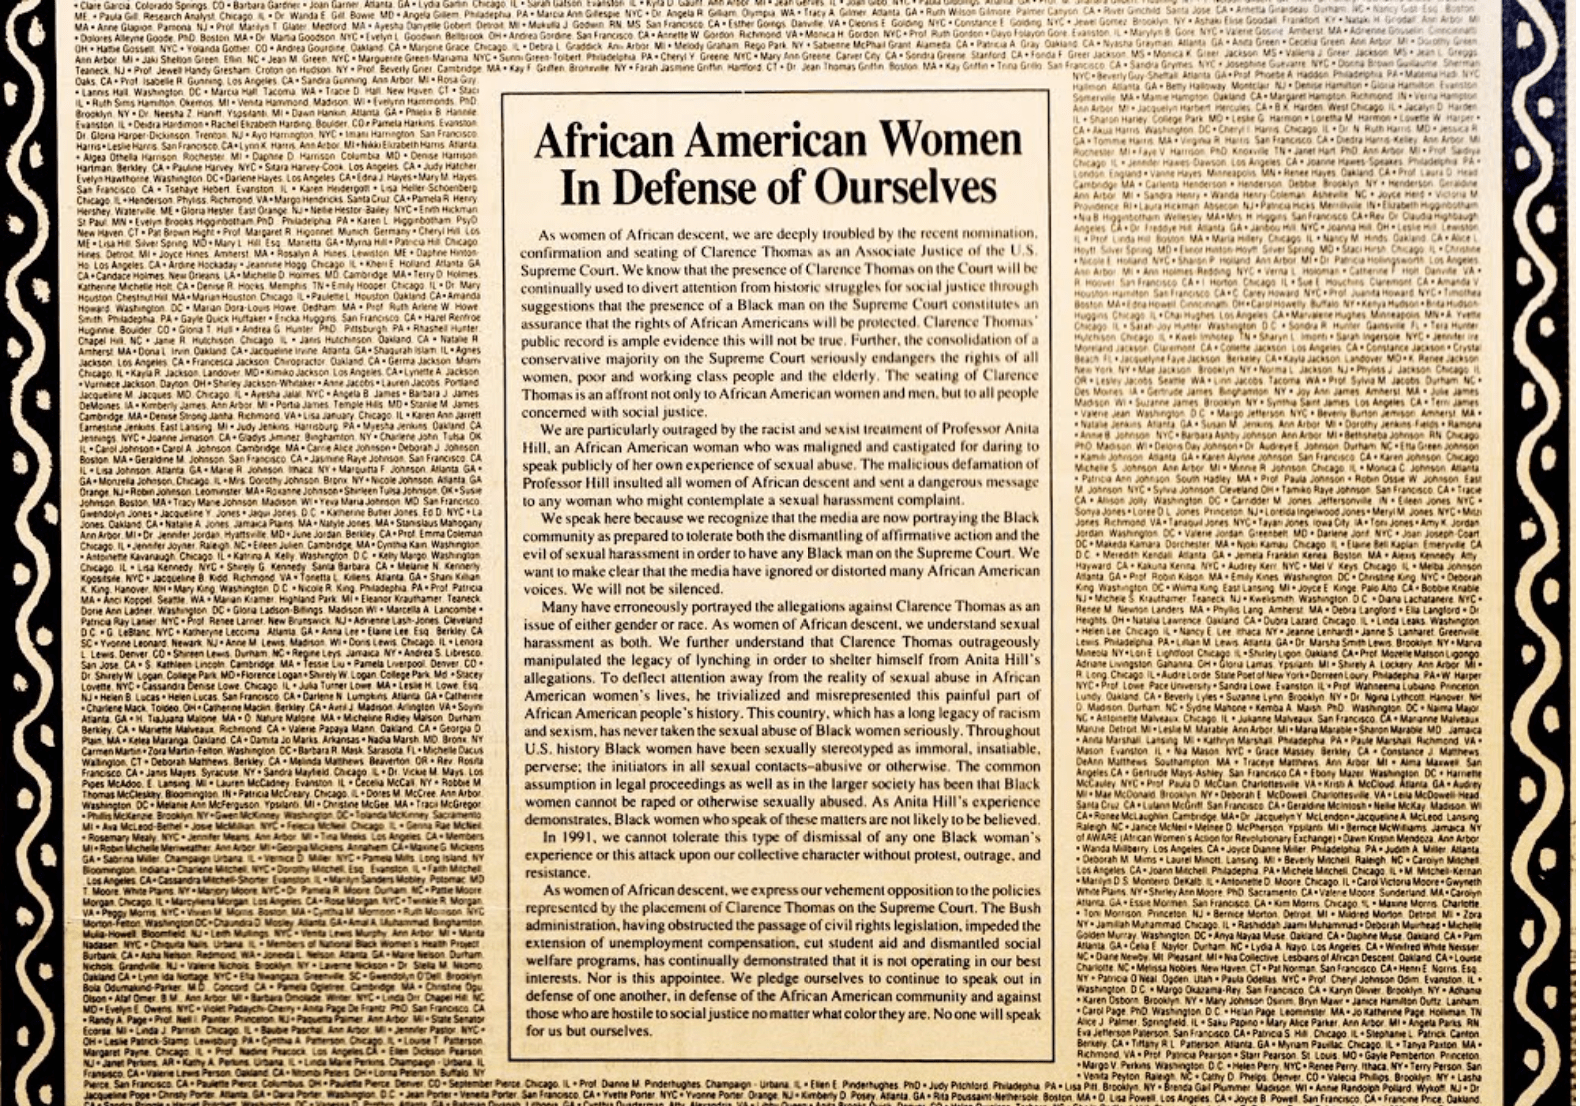 African American Women in Defense of Ourselves (AAWIDOO)